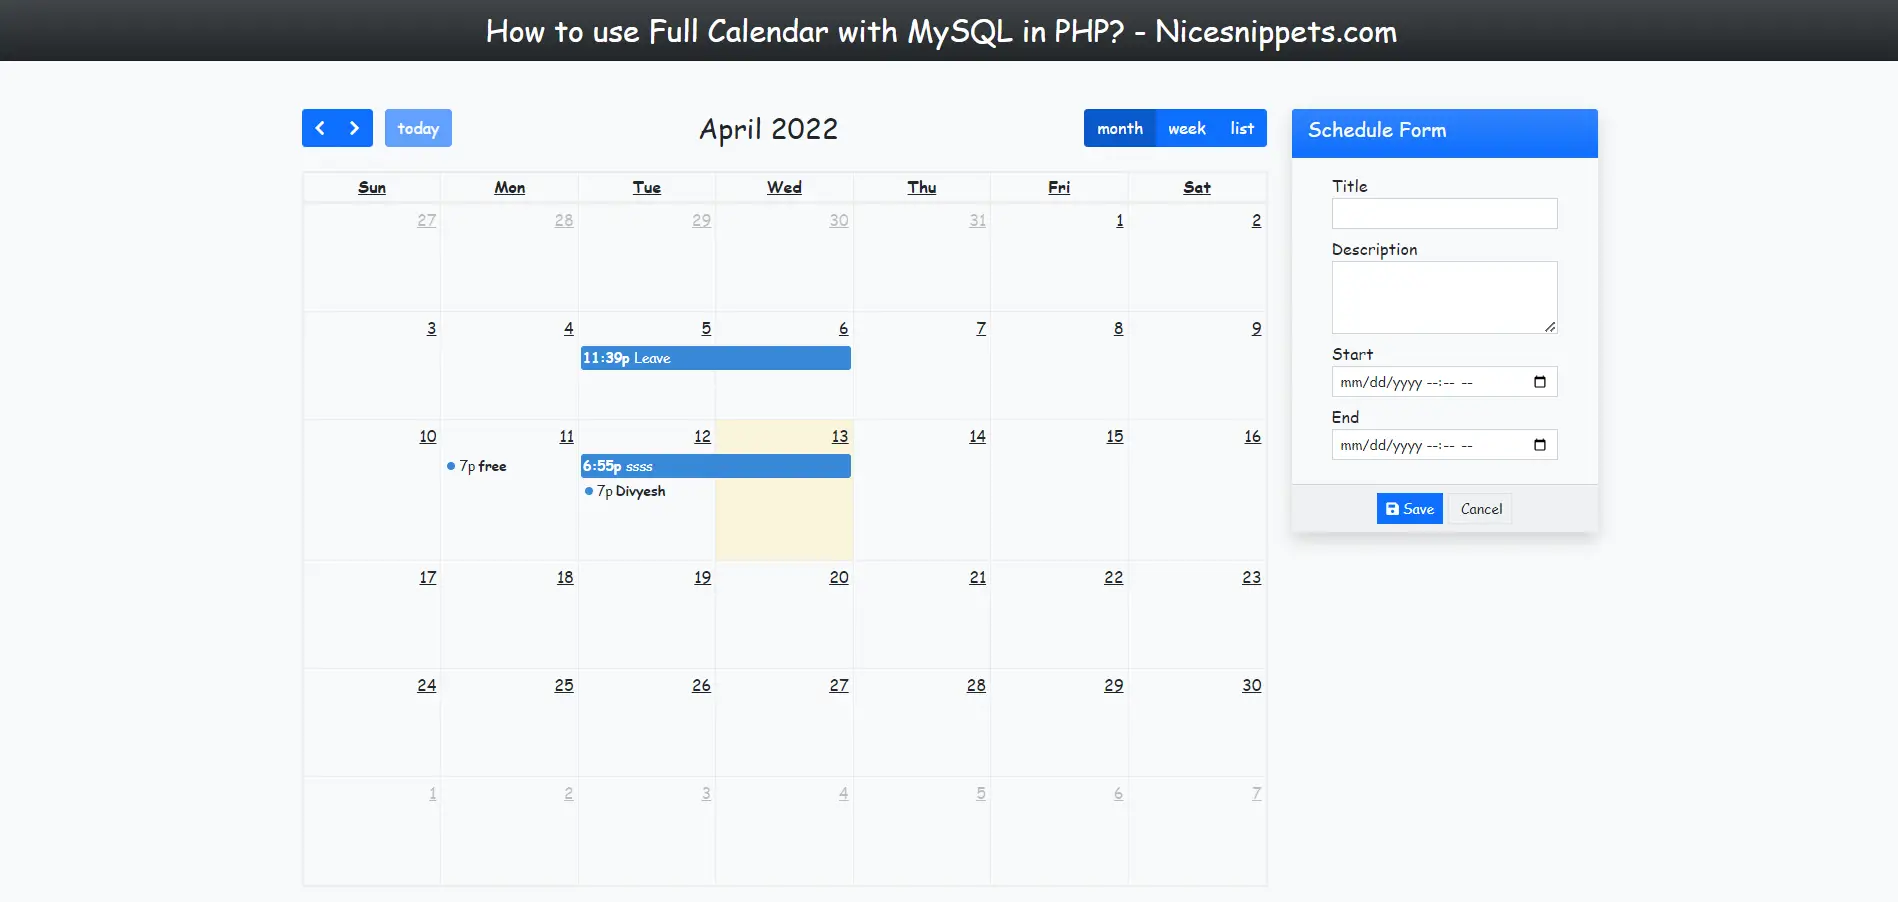 How to use FullCalendar with MySQL in PHP?